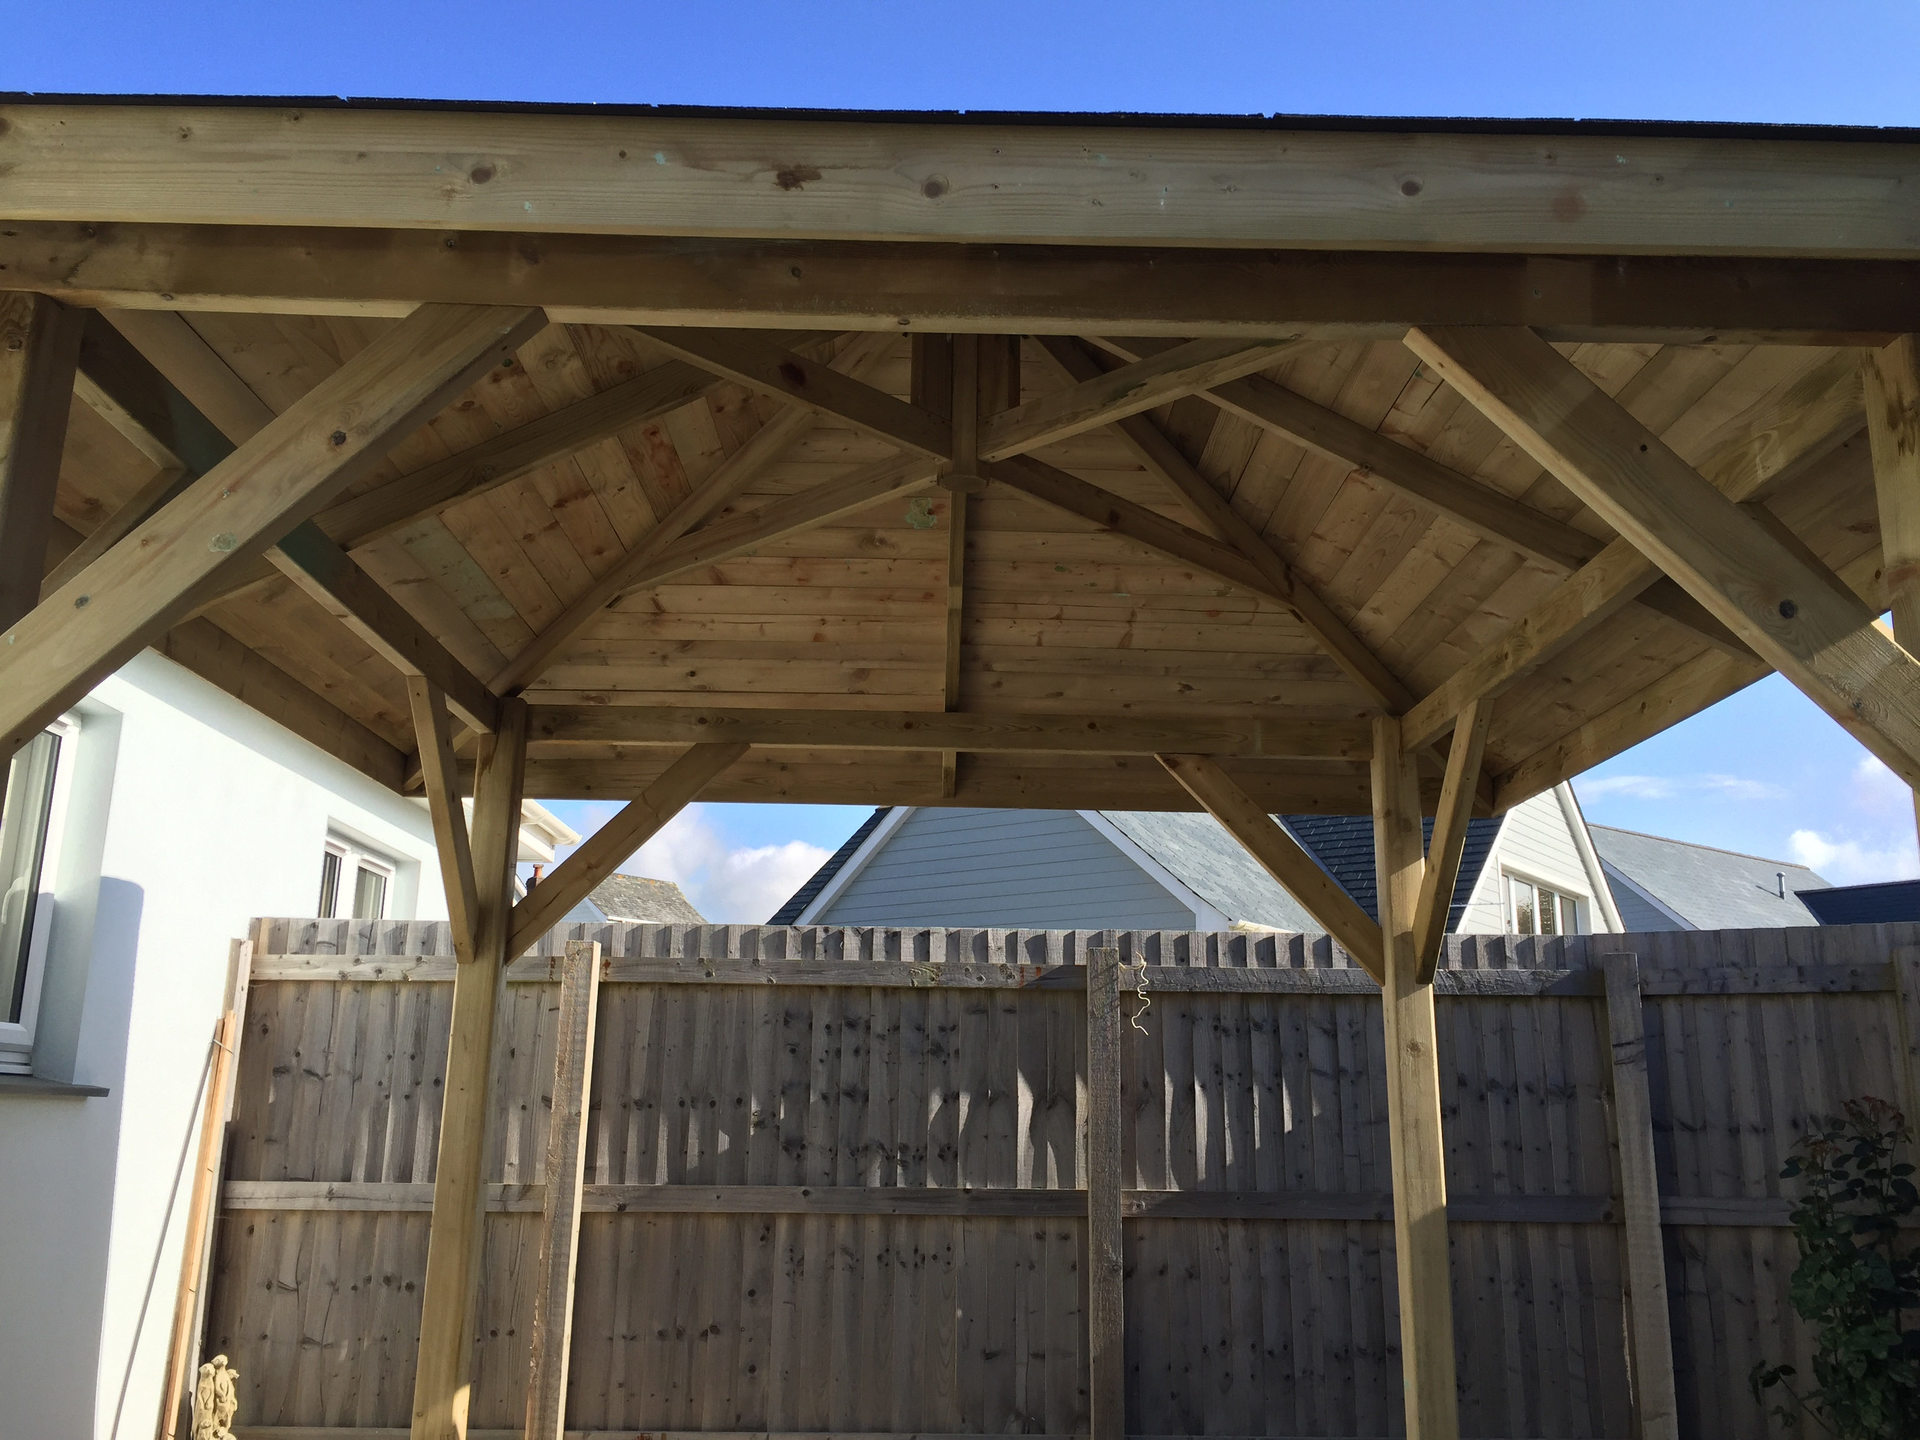 We were asked to design and build a gazebo for a local home in Barnstaple North Devon.